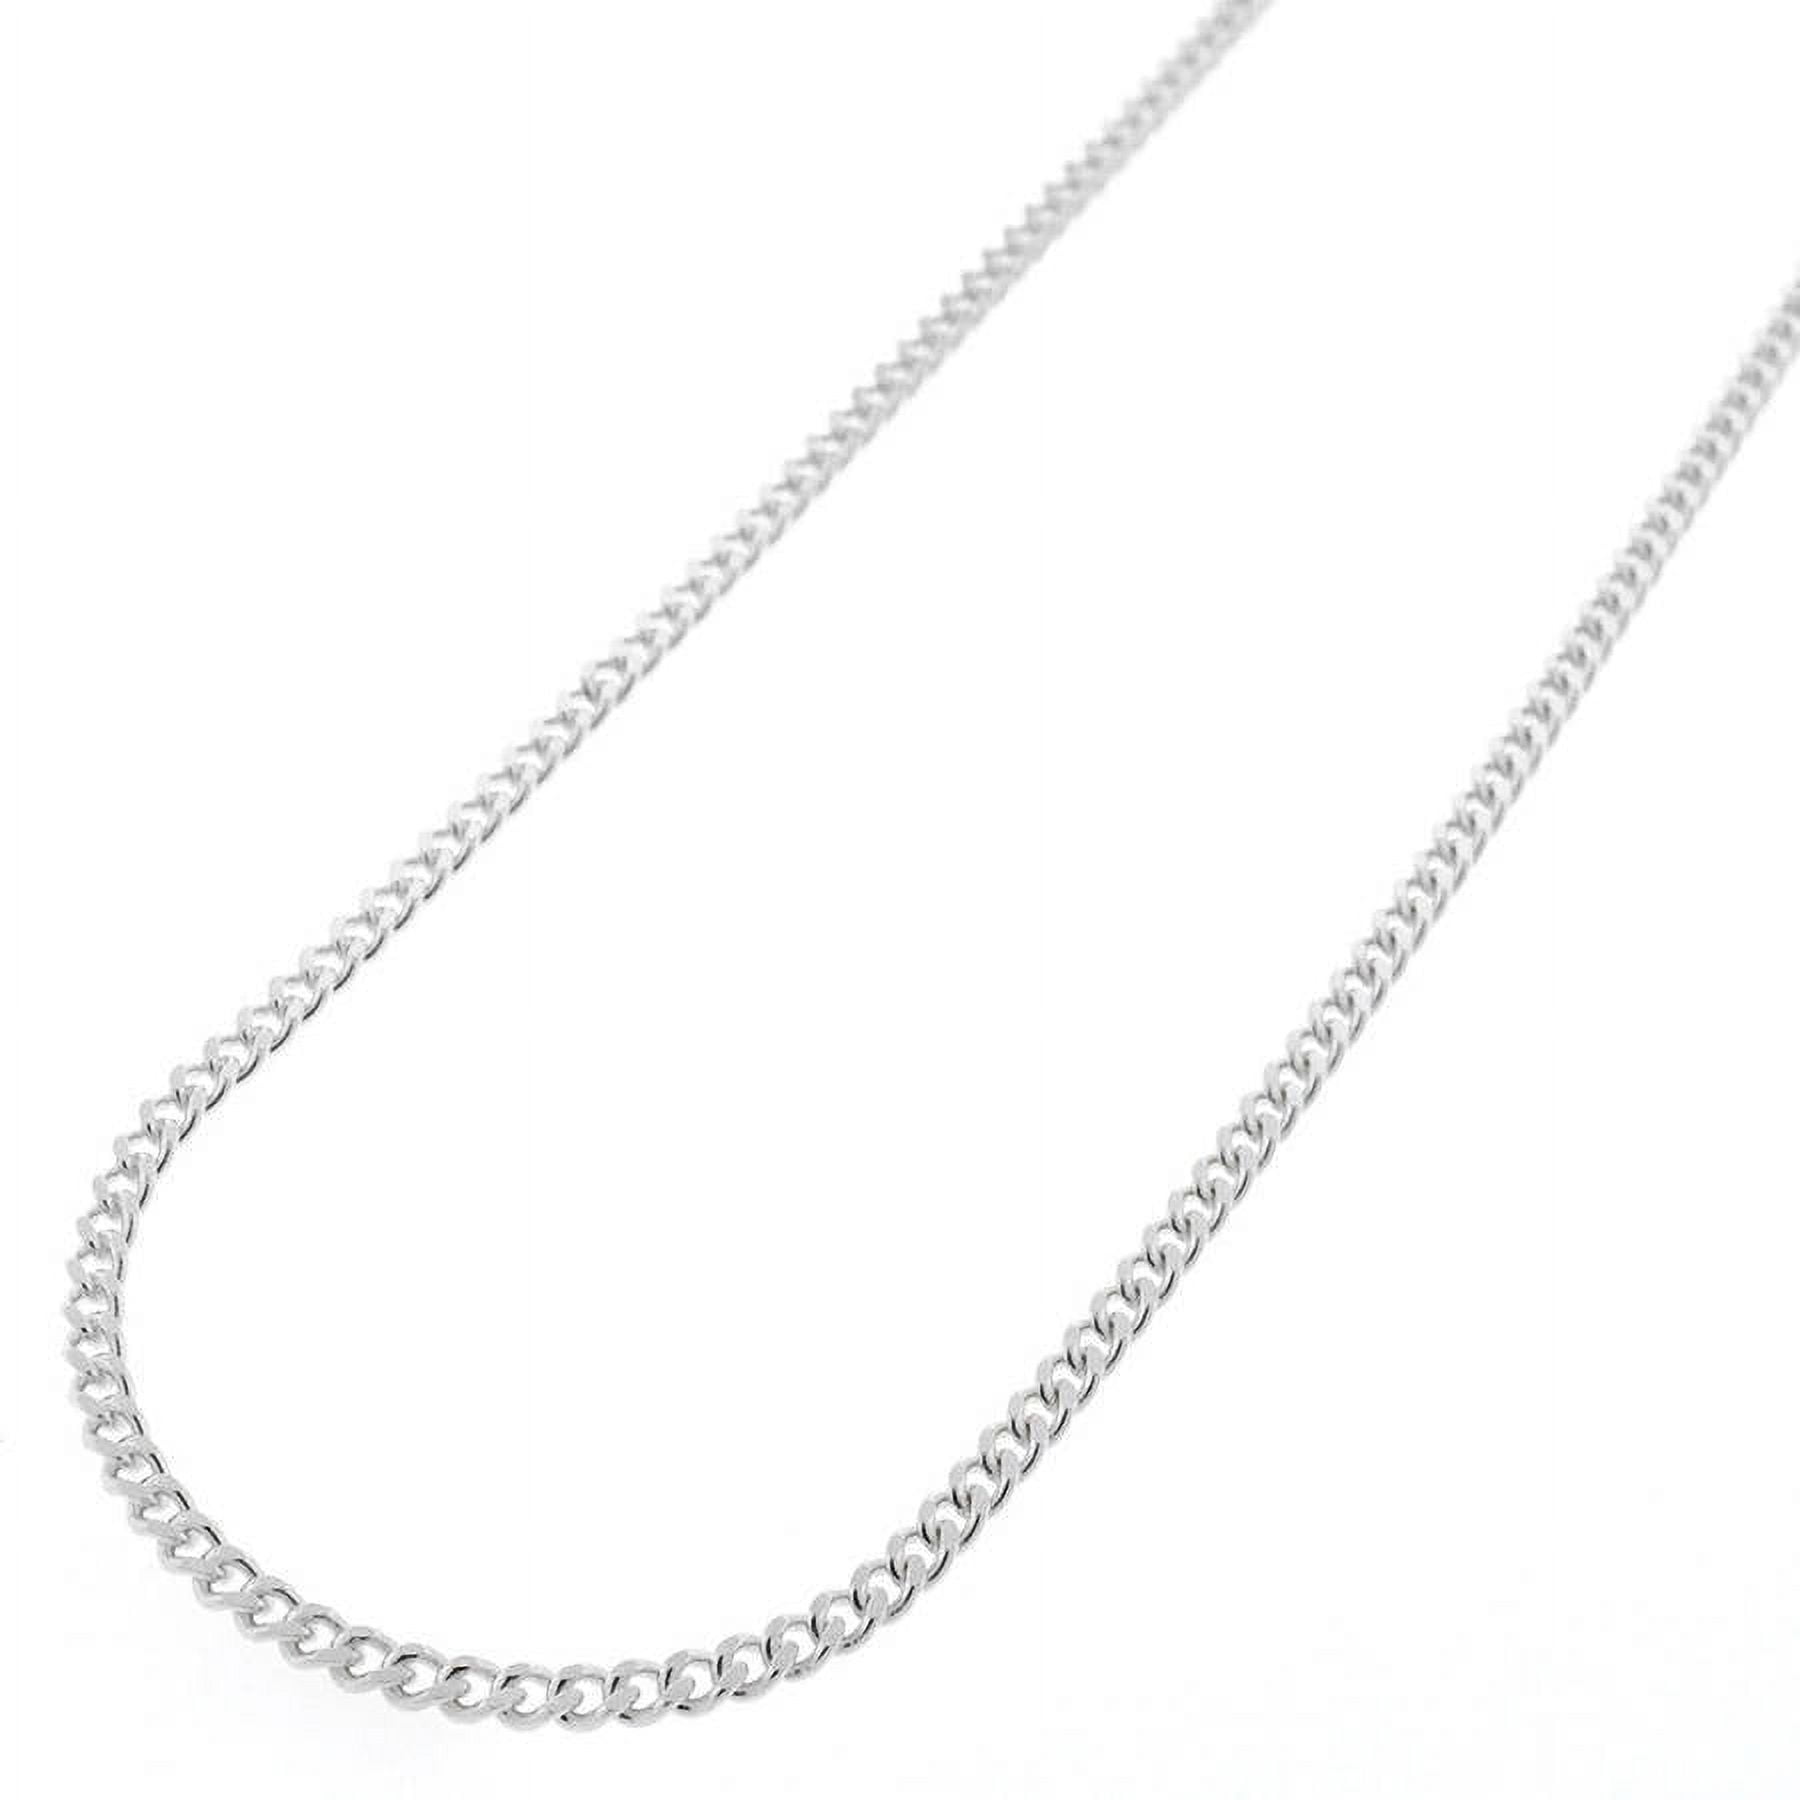 5 Silver Chain Link Necklaces 16 Inches 925 Sterling Silver Bulk Finished  Cable Necklaces Wholesale Chains 